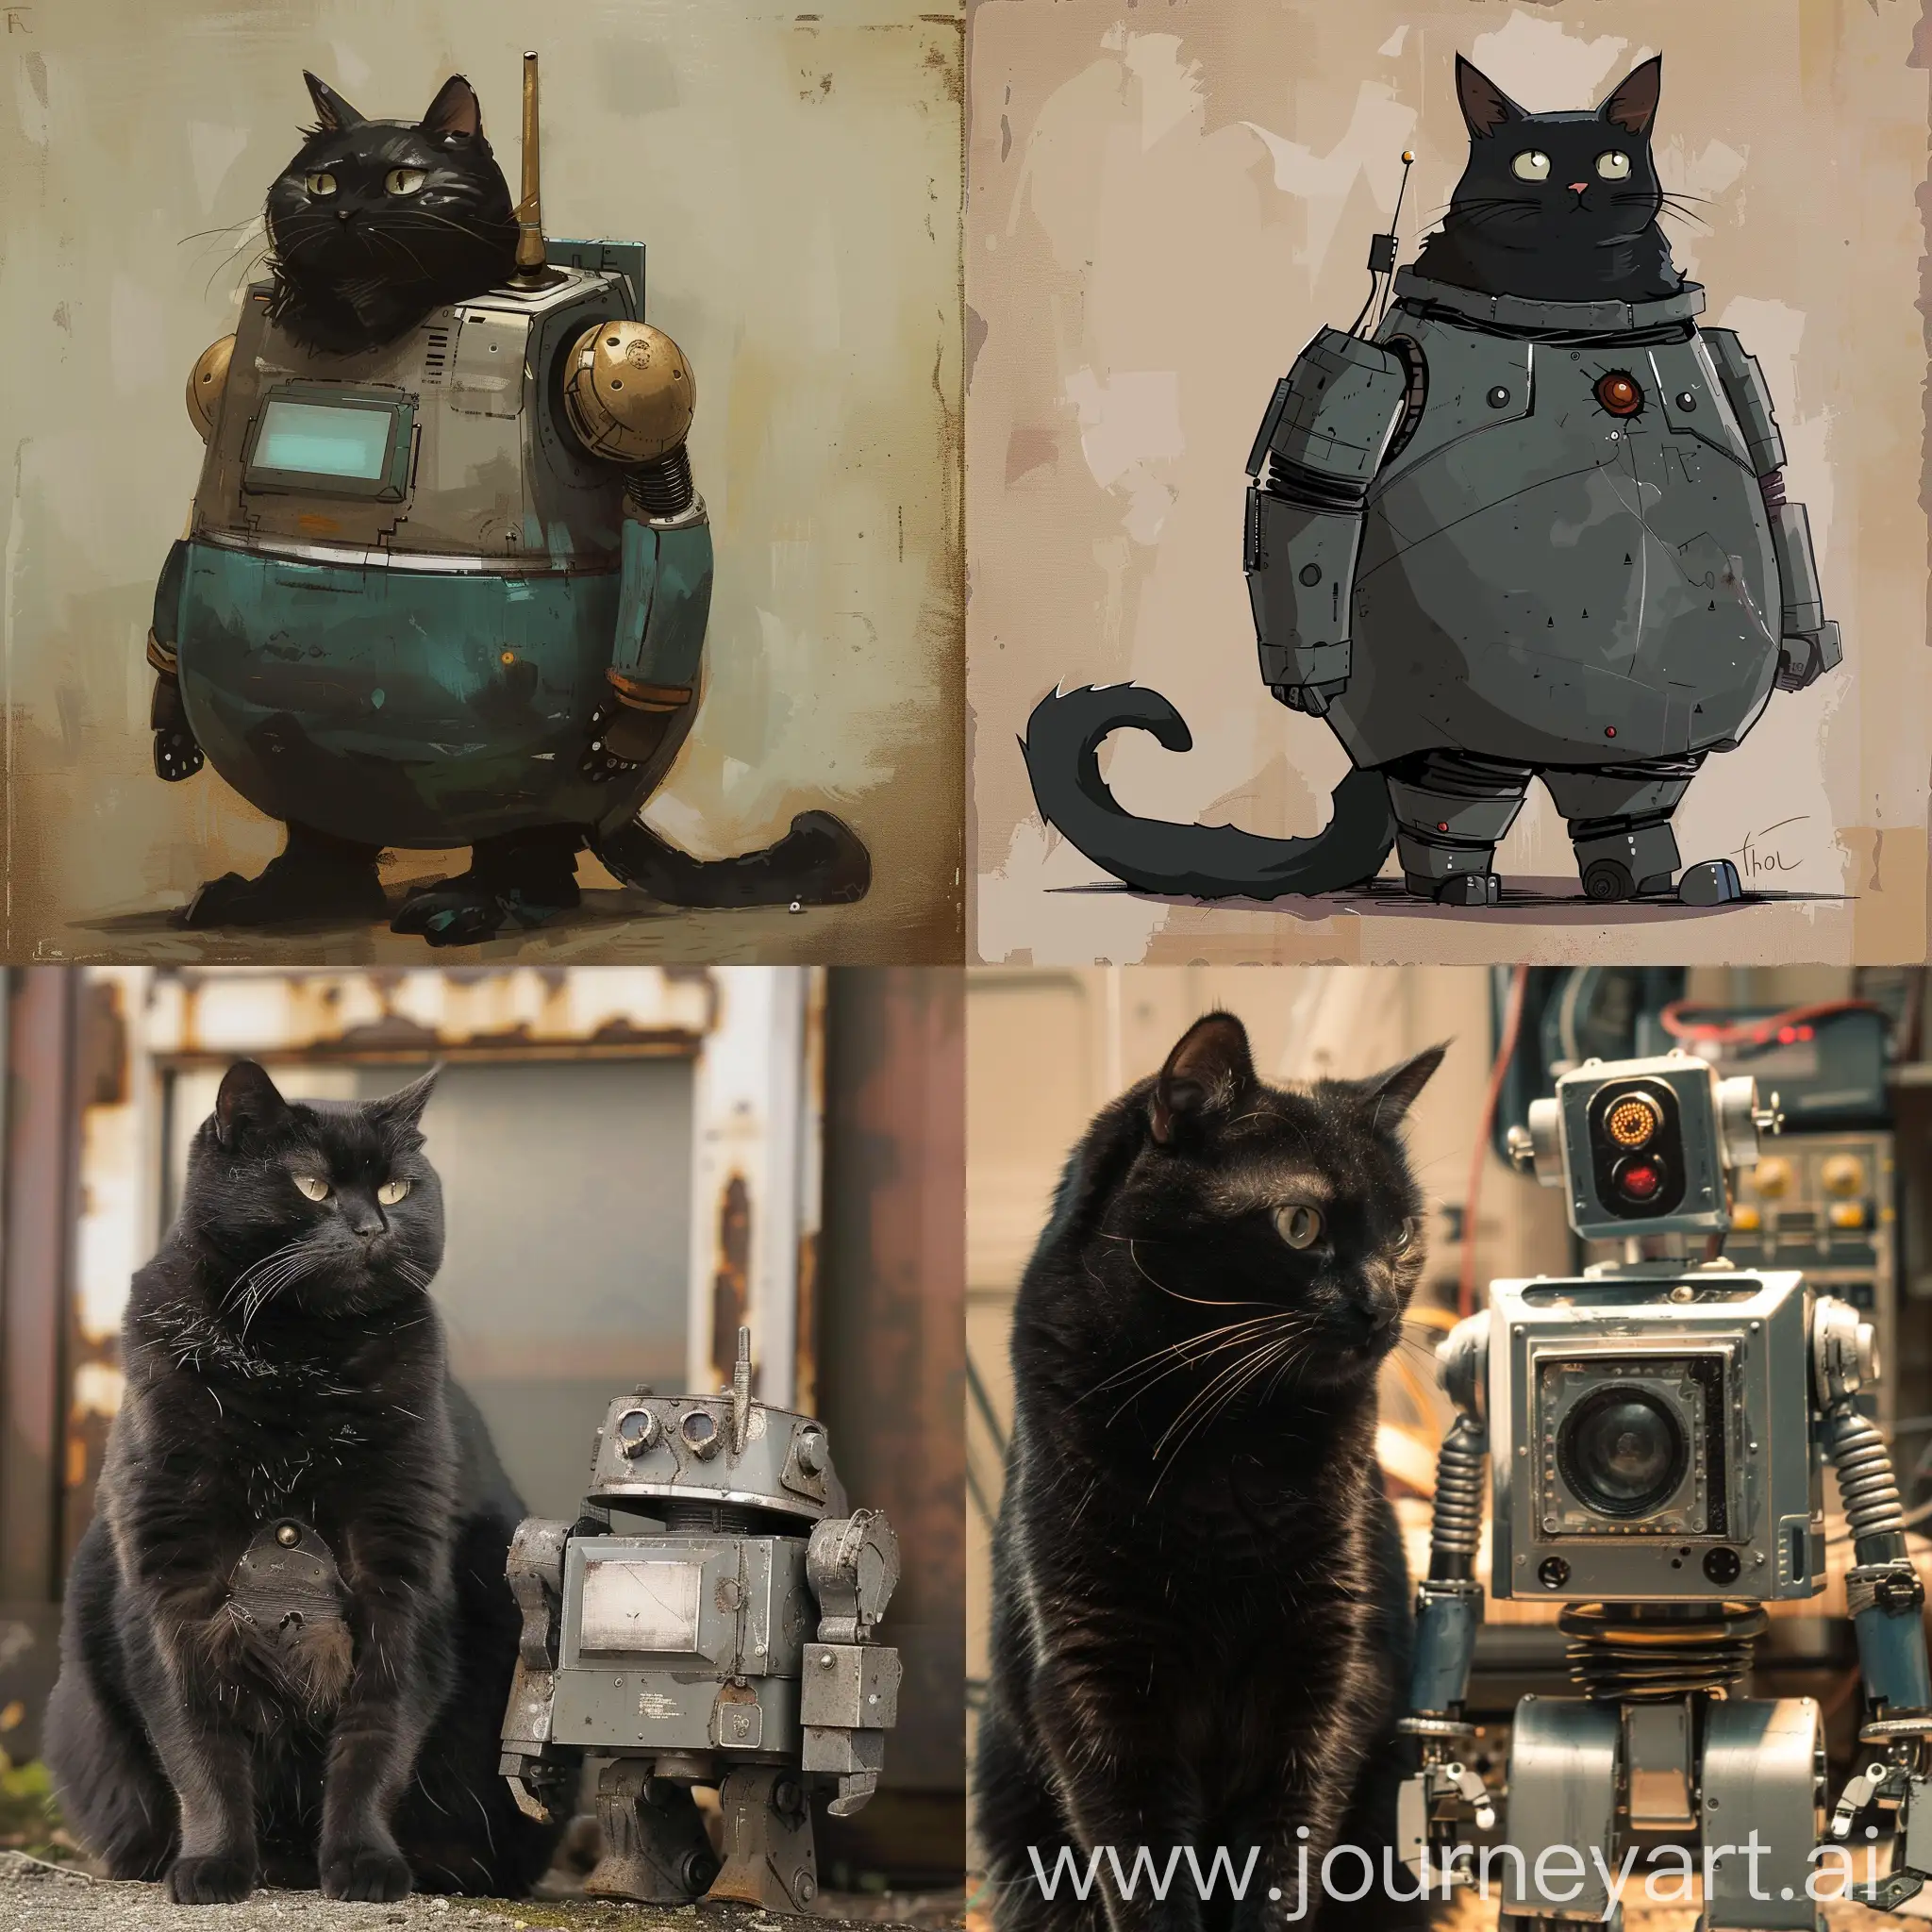 Chubby-Black-Cat-Playing-with-Robot-Companion